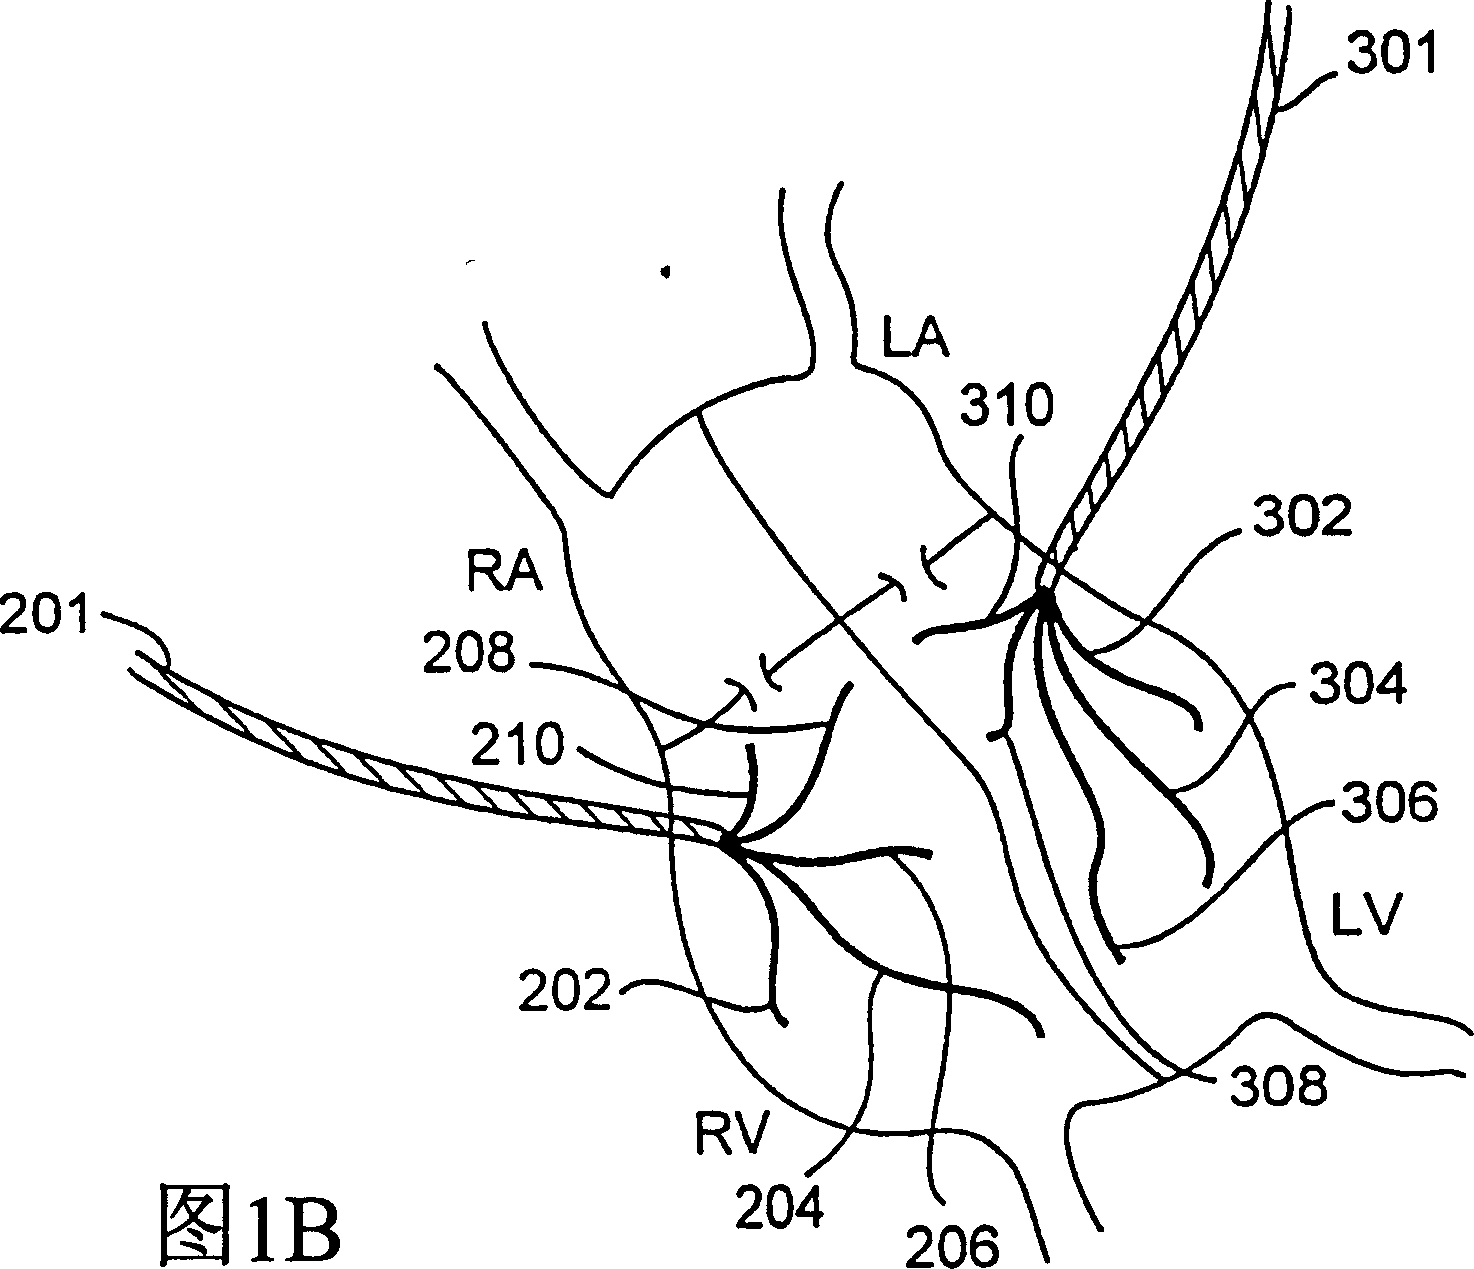 System and method for multiple site biphasic stimulation to restore ventricular arrhythmias